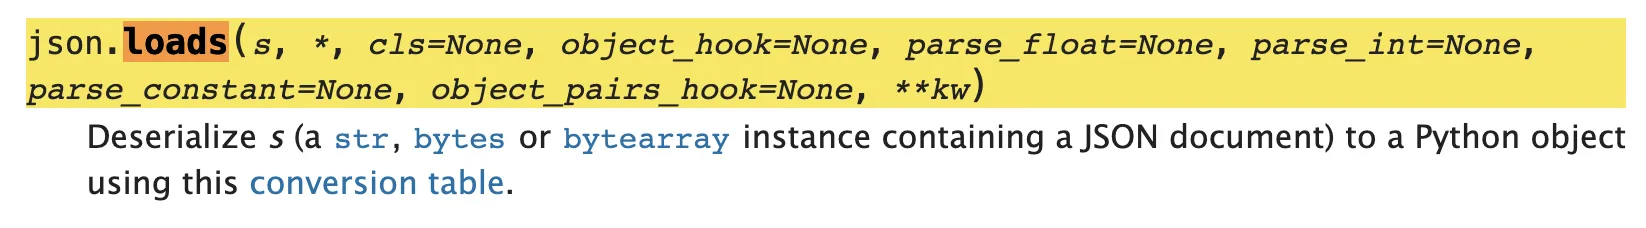 json.loads(s, *, cls=None, object_hook=None, parse_float=None, parse_int=None, parse_constant=None, object_pairs_hook=None, **kw)
Deserialize s (a str, bytes or bytearray instance containing a JSON document) to a Python object using this conversion table.